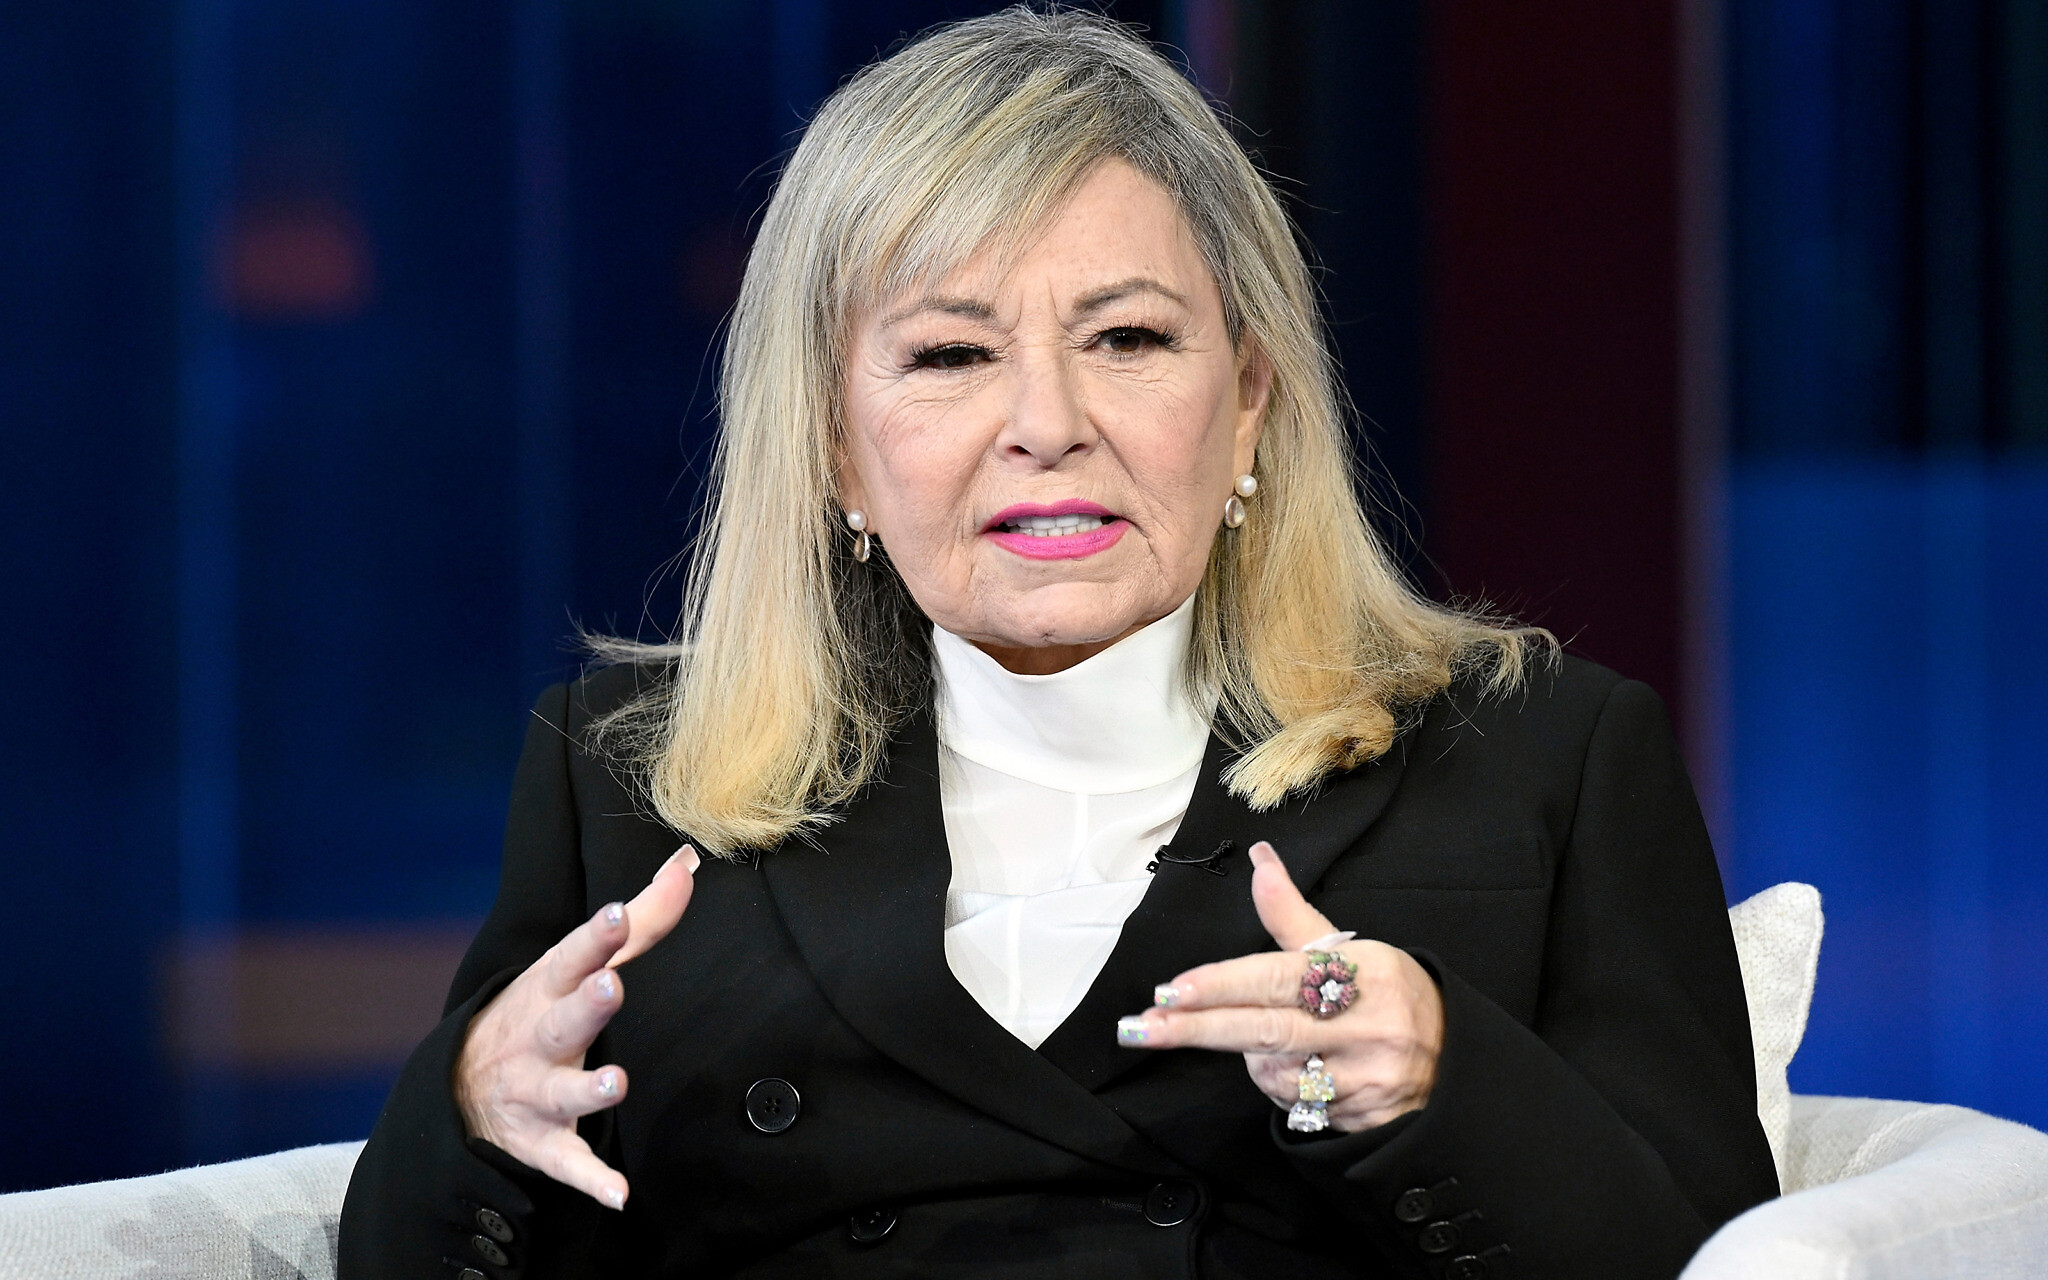 Jewish comedian Roseanne Barr draws fire for remarks on Holocaust, Jews